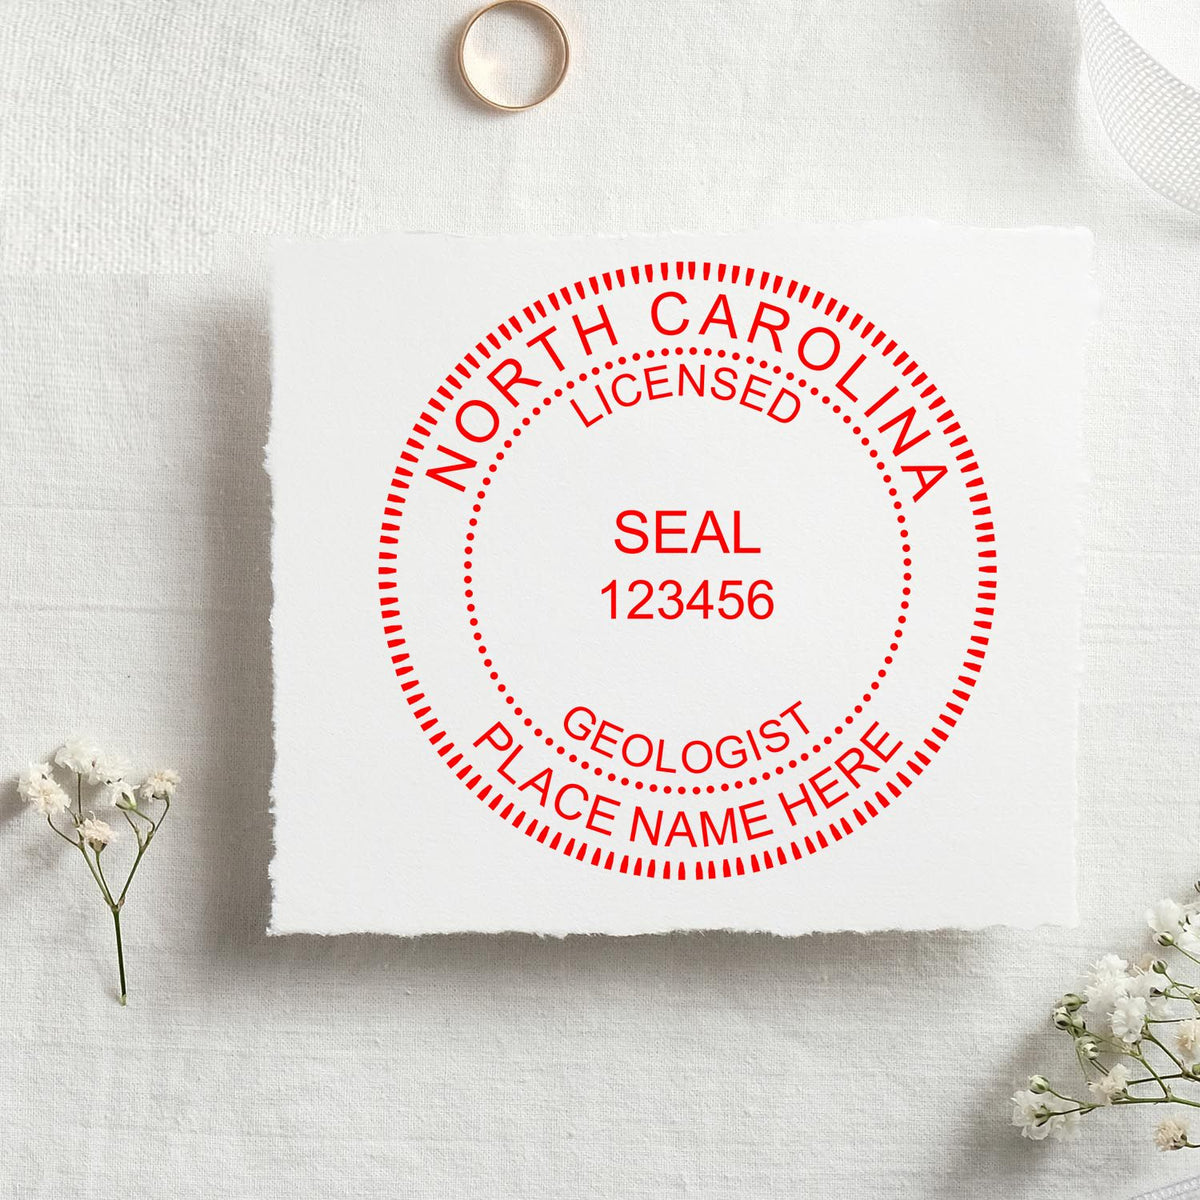 A stamped imprint of the Slim Pre-Inked North Carolina Professional Geologist Seal Stamp in this stylish lifestyle photo, setting the tone for a unique and personalized product.